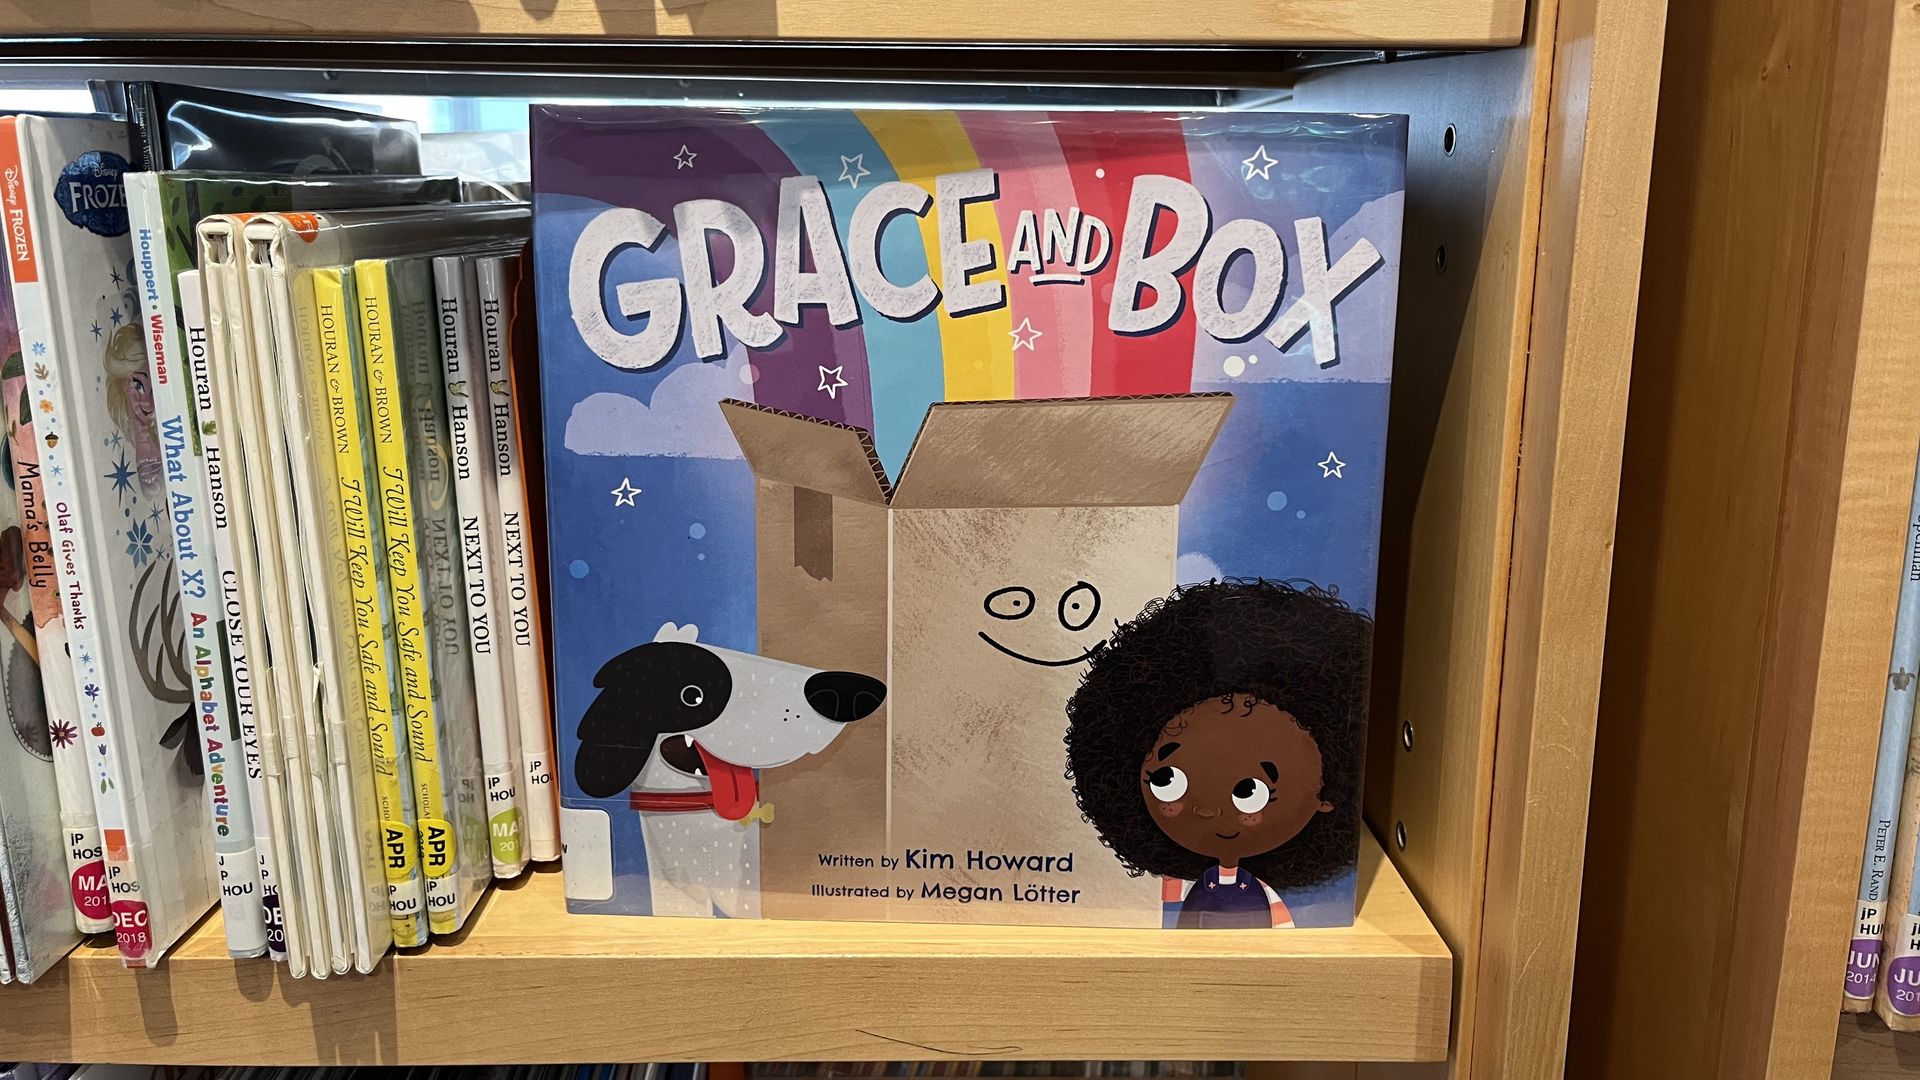 The cover of a book with a dog, a box and a little girl